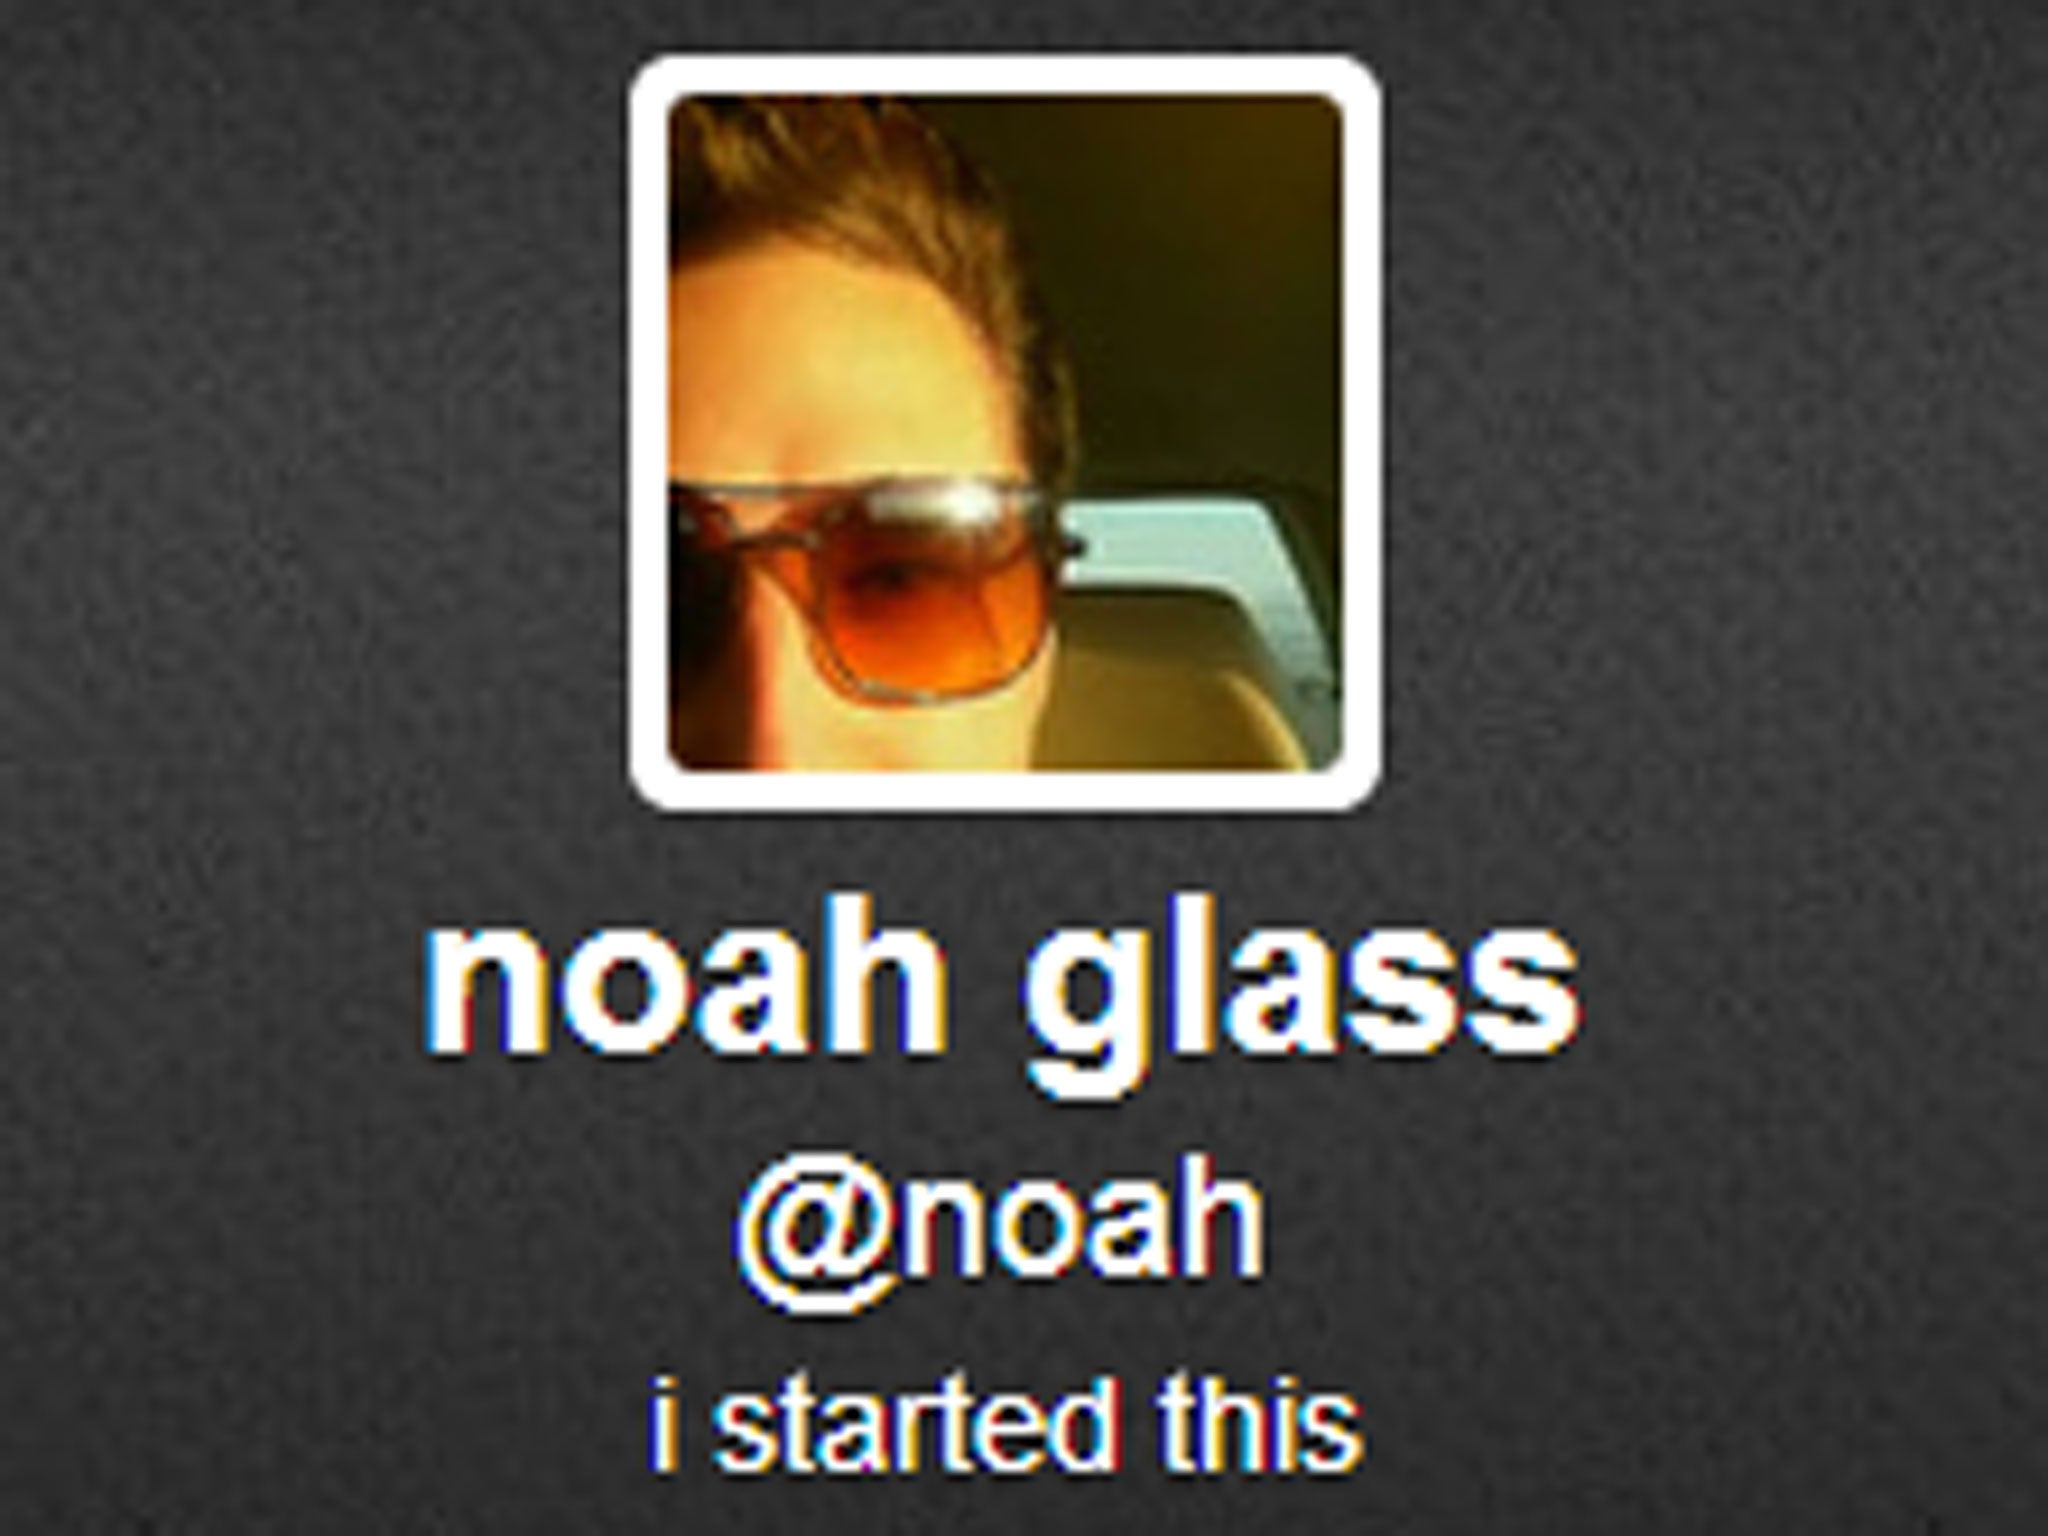 Noah Glass, @noah on Twitter, reportedly christened the micro-blogging site